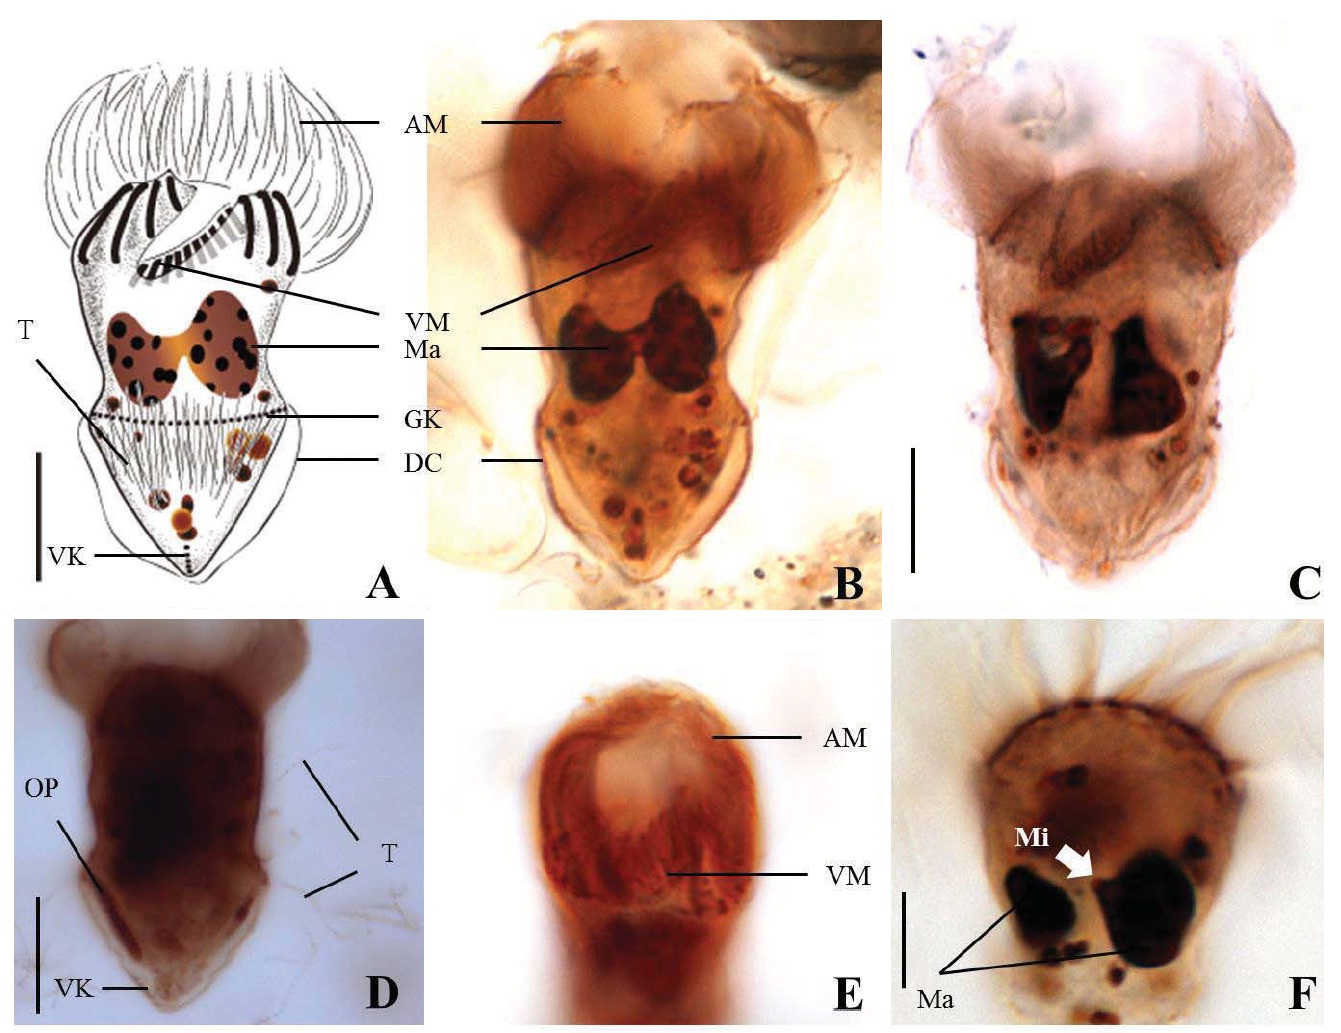 Strombidium bilobum after protargol impregnation. A-C, Ventral view; D, Lateral view, oral primordium originated below girdle part and trichites extruded from body; E, Ventral membranelles almost covered by apical collar; F, Two macronuclear nodules. AM, anterior membranelles; DC, distended cell surface; GK, girdle kinety; Ma, macronucleus (or macronuclear nodules); Mi, micronucleus; OP, oral primordium; T, trichites; VK, ventral kinety; VM, ventral membranelles. Scale bars: A, C, D, F=10 μm.